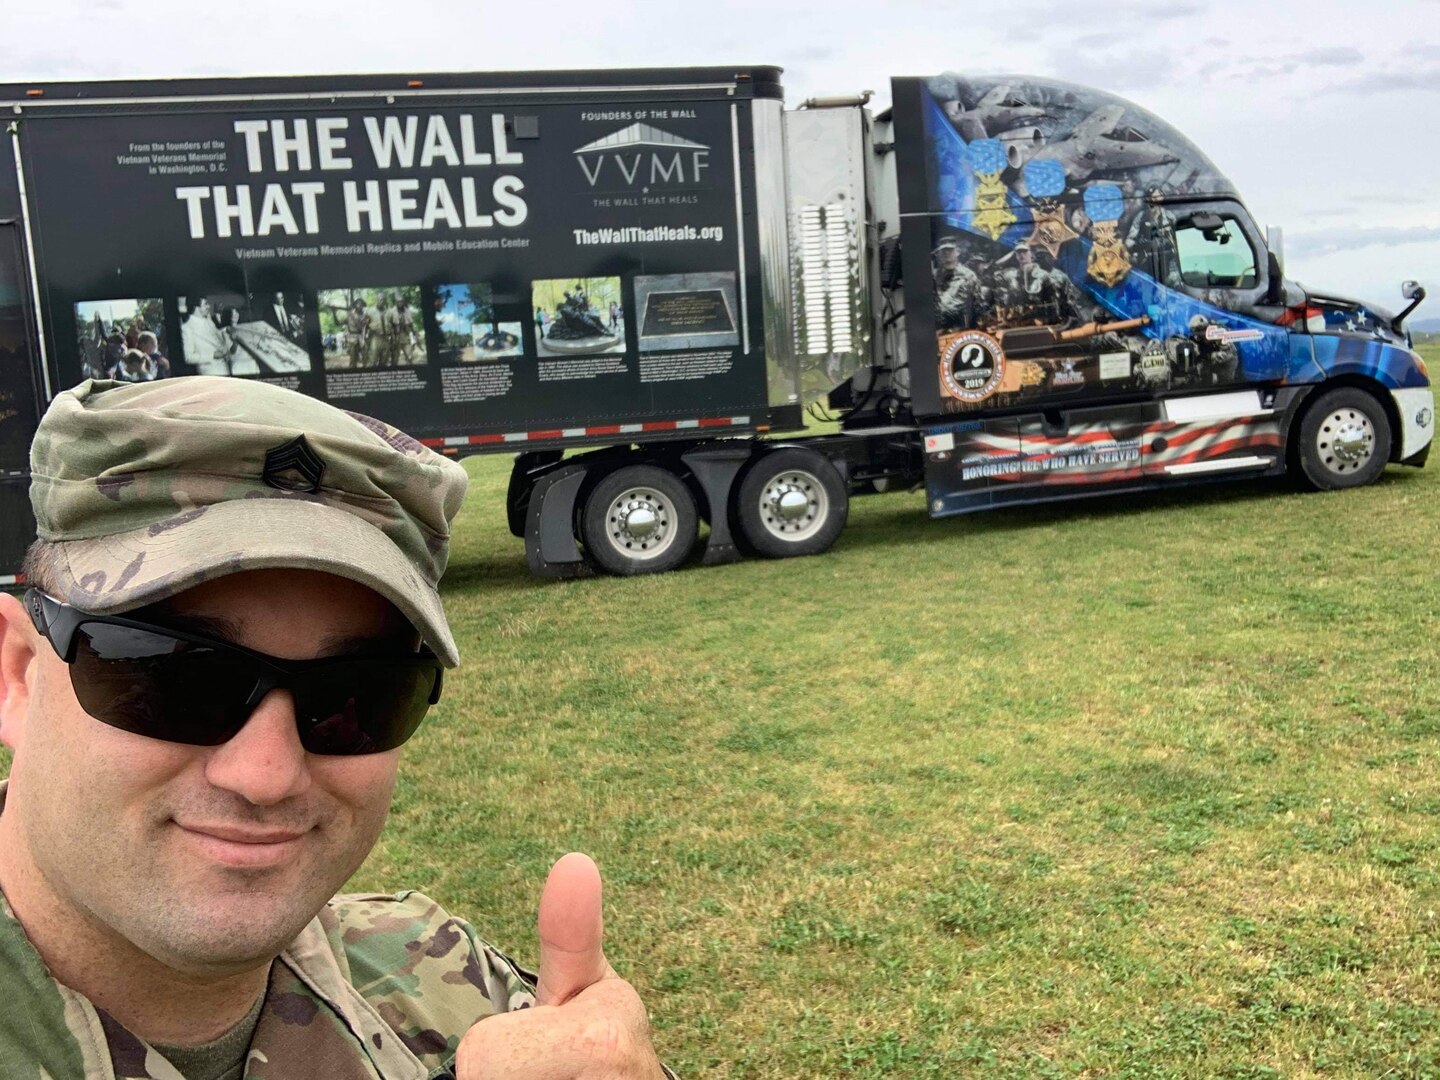 Staff Sgt. Chris Dickenson, a recruiter for the Virginia Army National Guard, poses during the arrival of the Wall That Heals to Poplar Gap Park in Grundy, Virginia. The wall, which is a three quarters replica of the Vietnam Veterans Memorial in Washington, D.C., was displayed in the park May 6-9, 2021. (Courtesy photo)